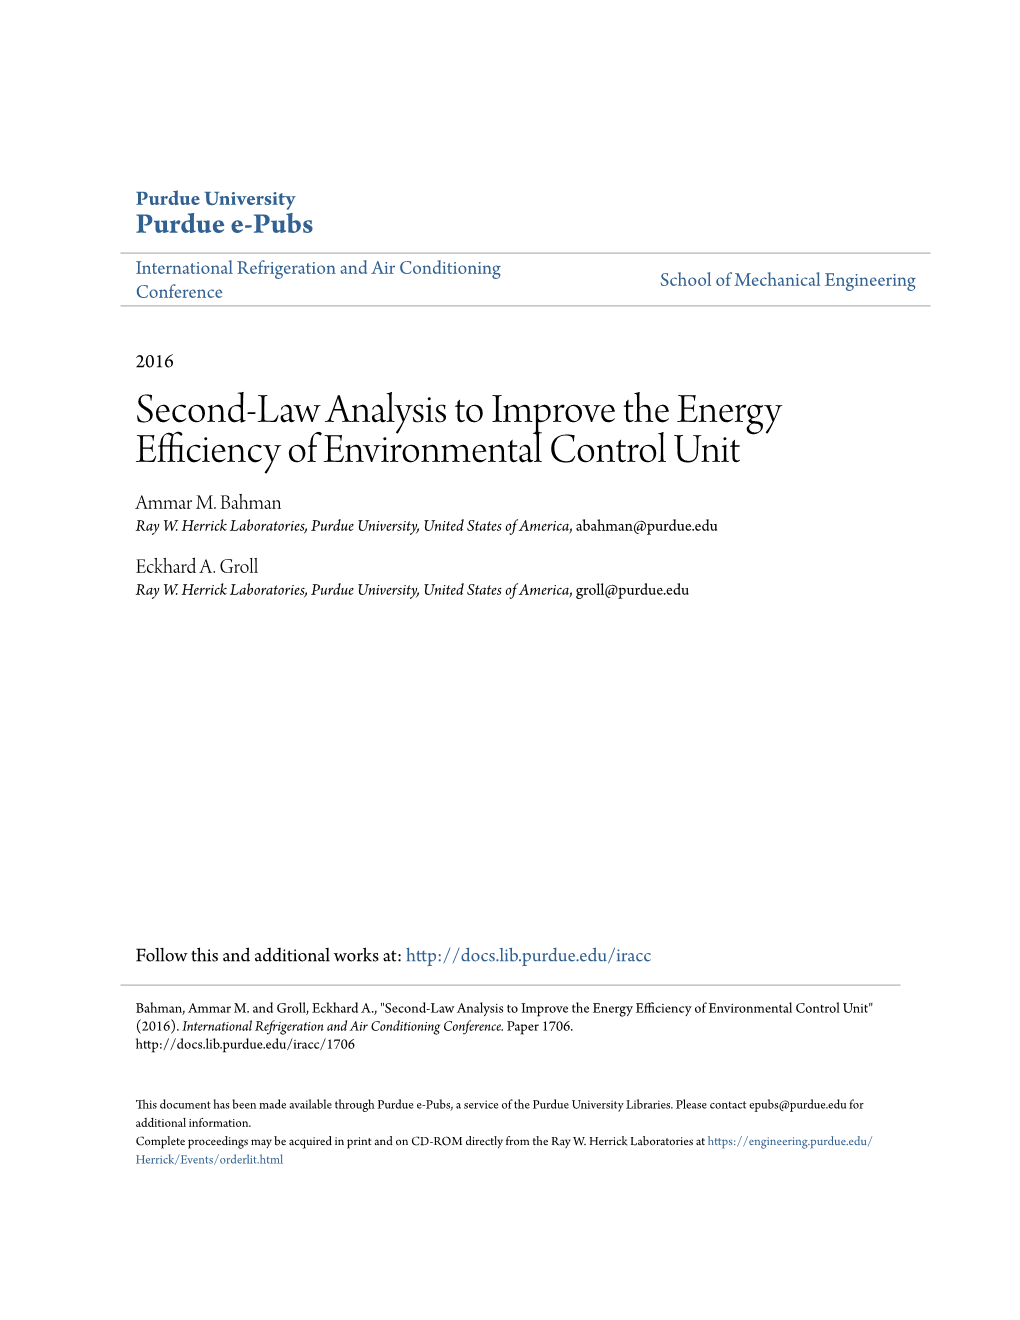 Second-Law Analysis to Improve the Energy Efficiency of Environmental Control Unit Ammar M